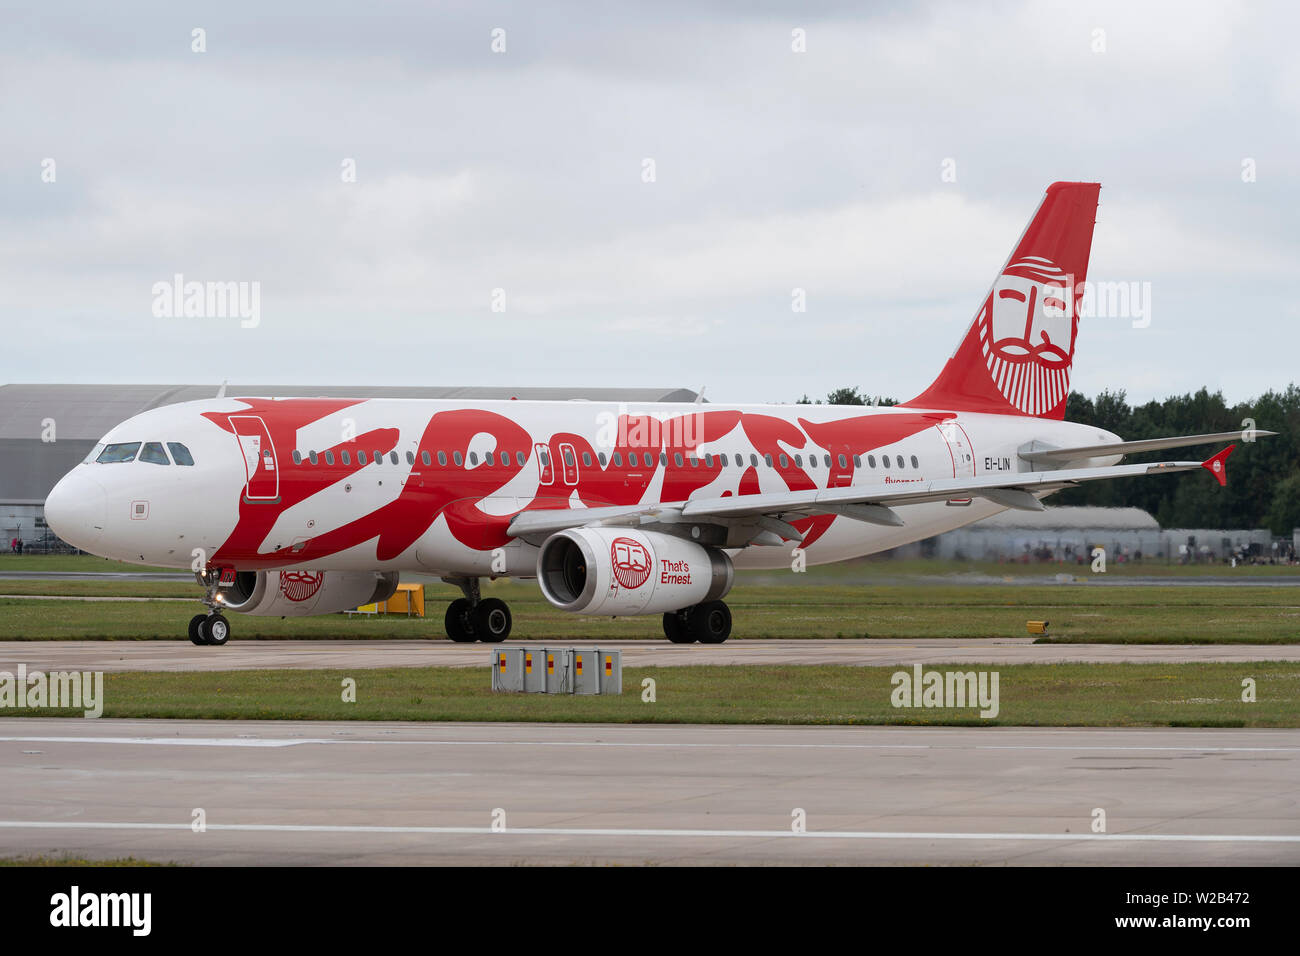 An Ernest Airbus A320-200 taxis on the runway at Manchester Airport, UK. Stock Photo